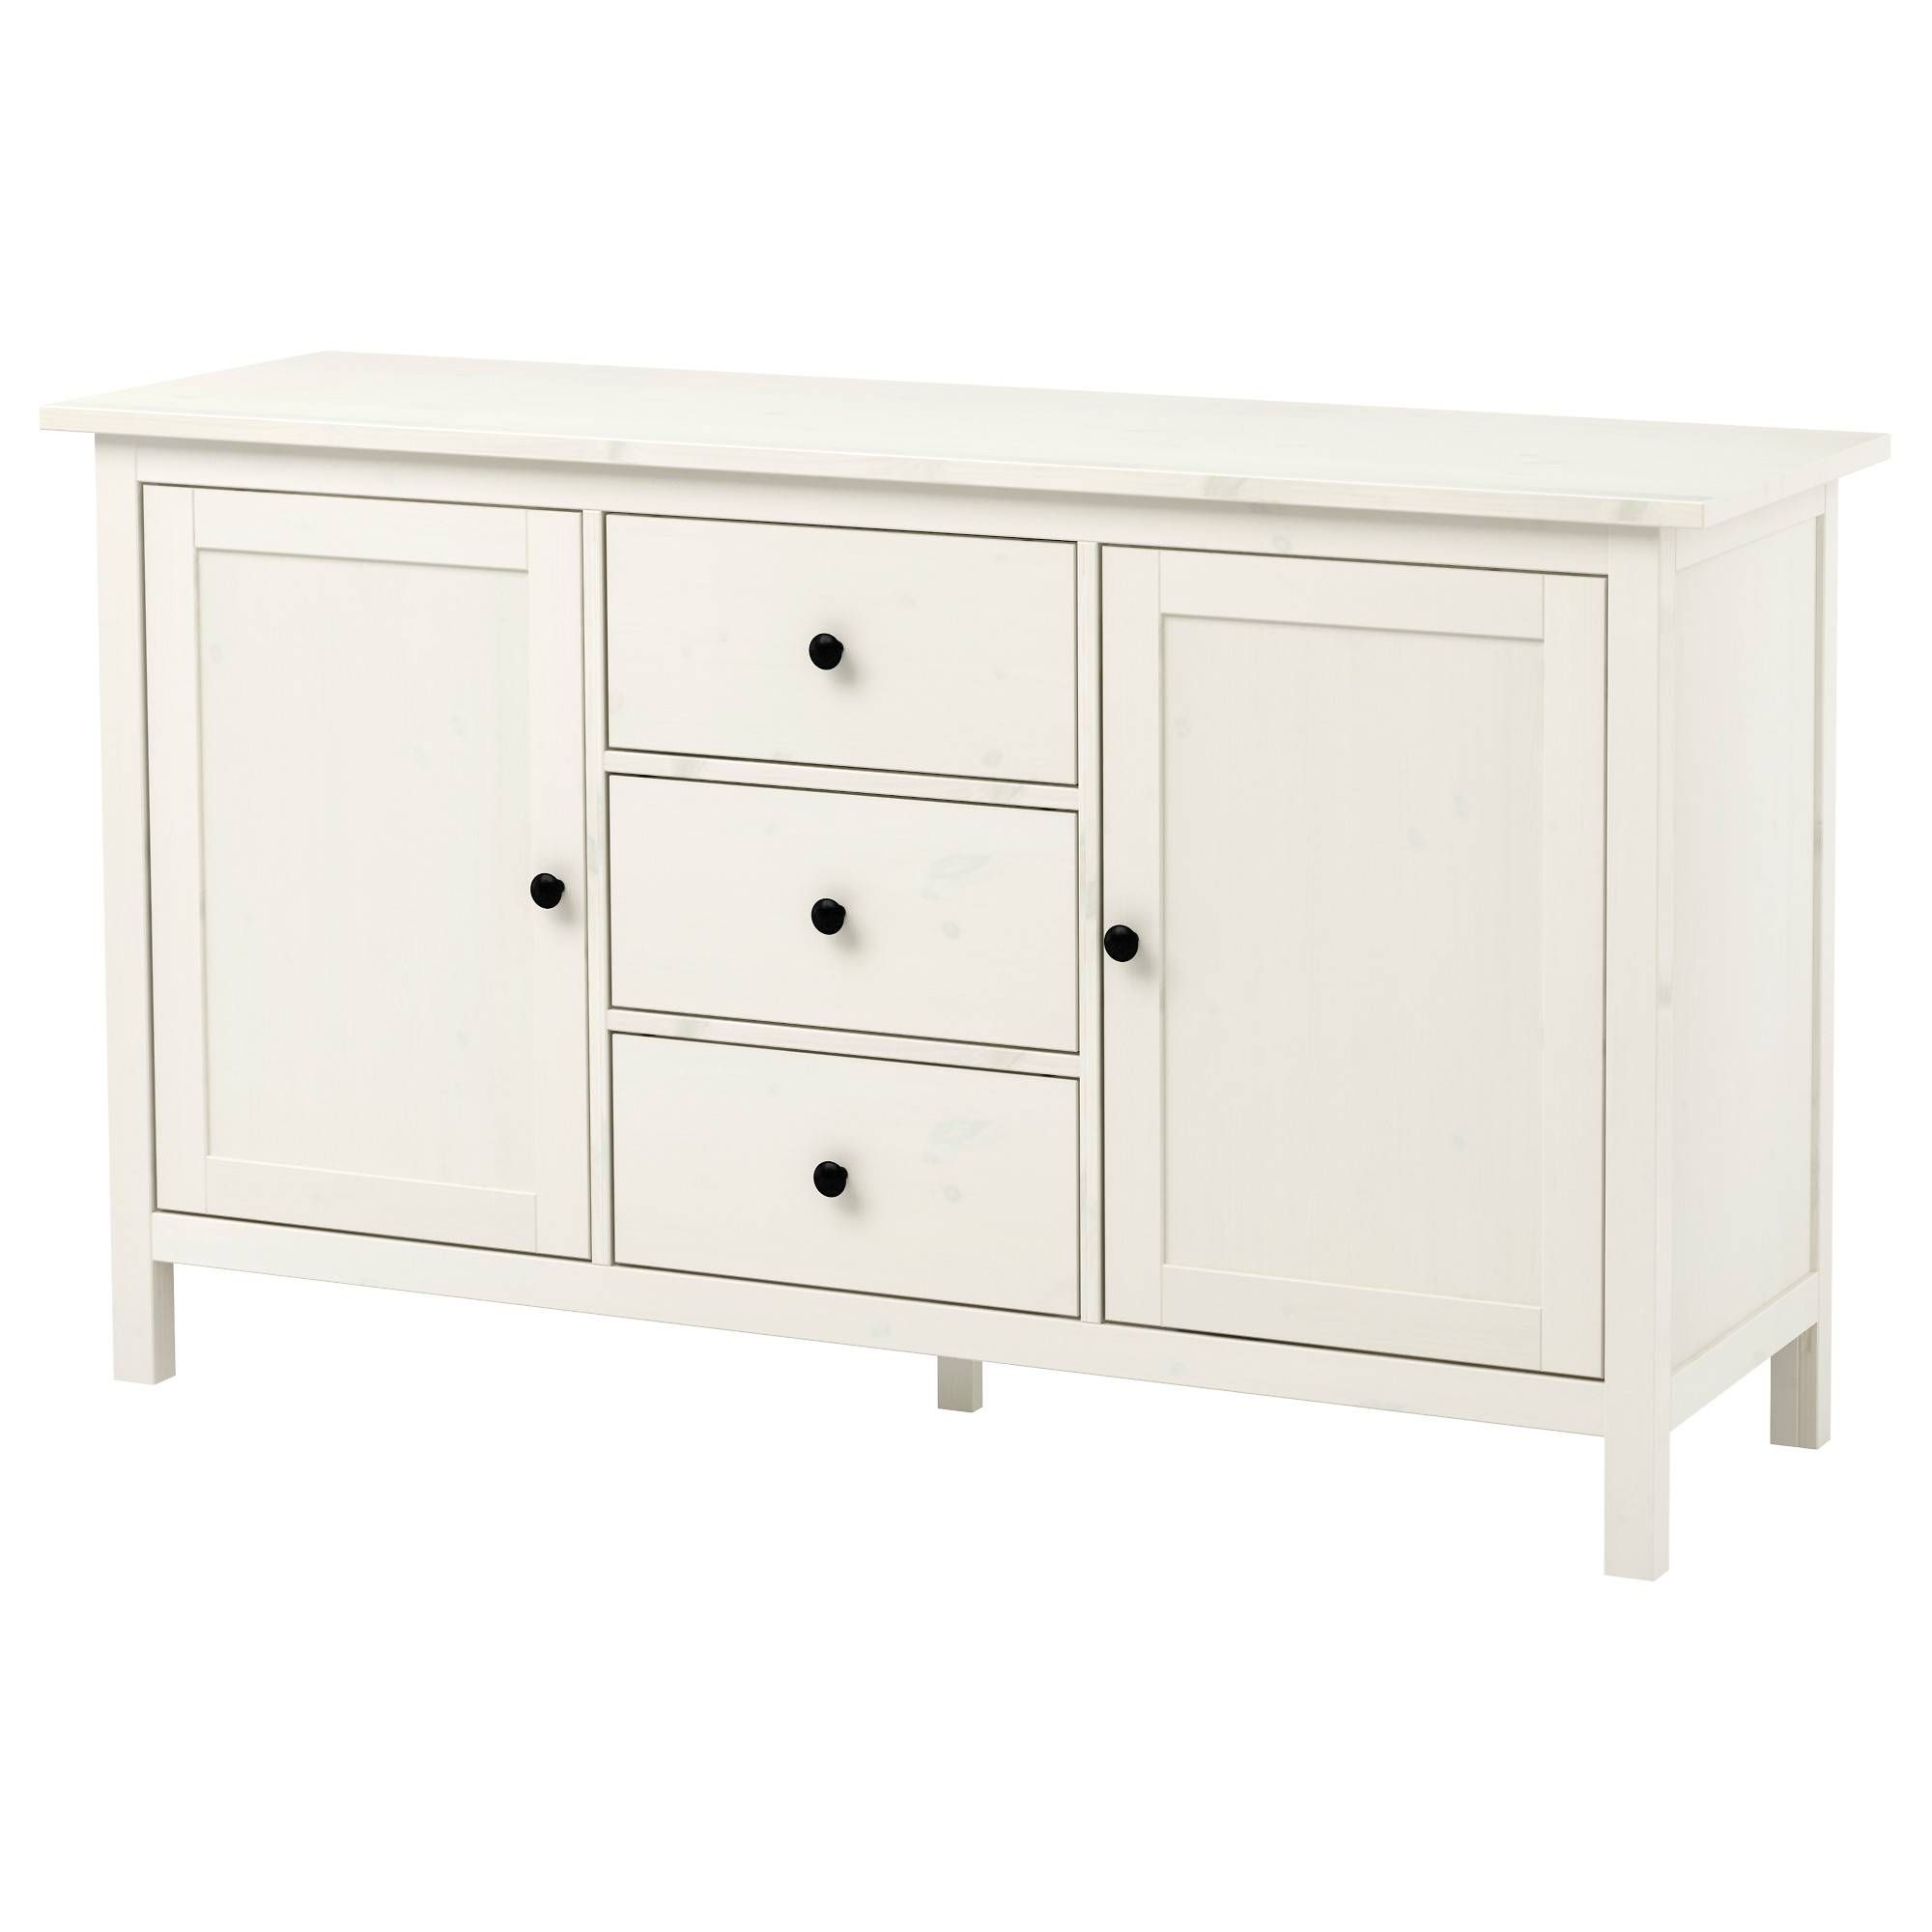 Hemnes Sideboard – White Stain – Ikea Within Most Recently Released Hallway Sideboards (View 3 of 15)